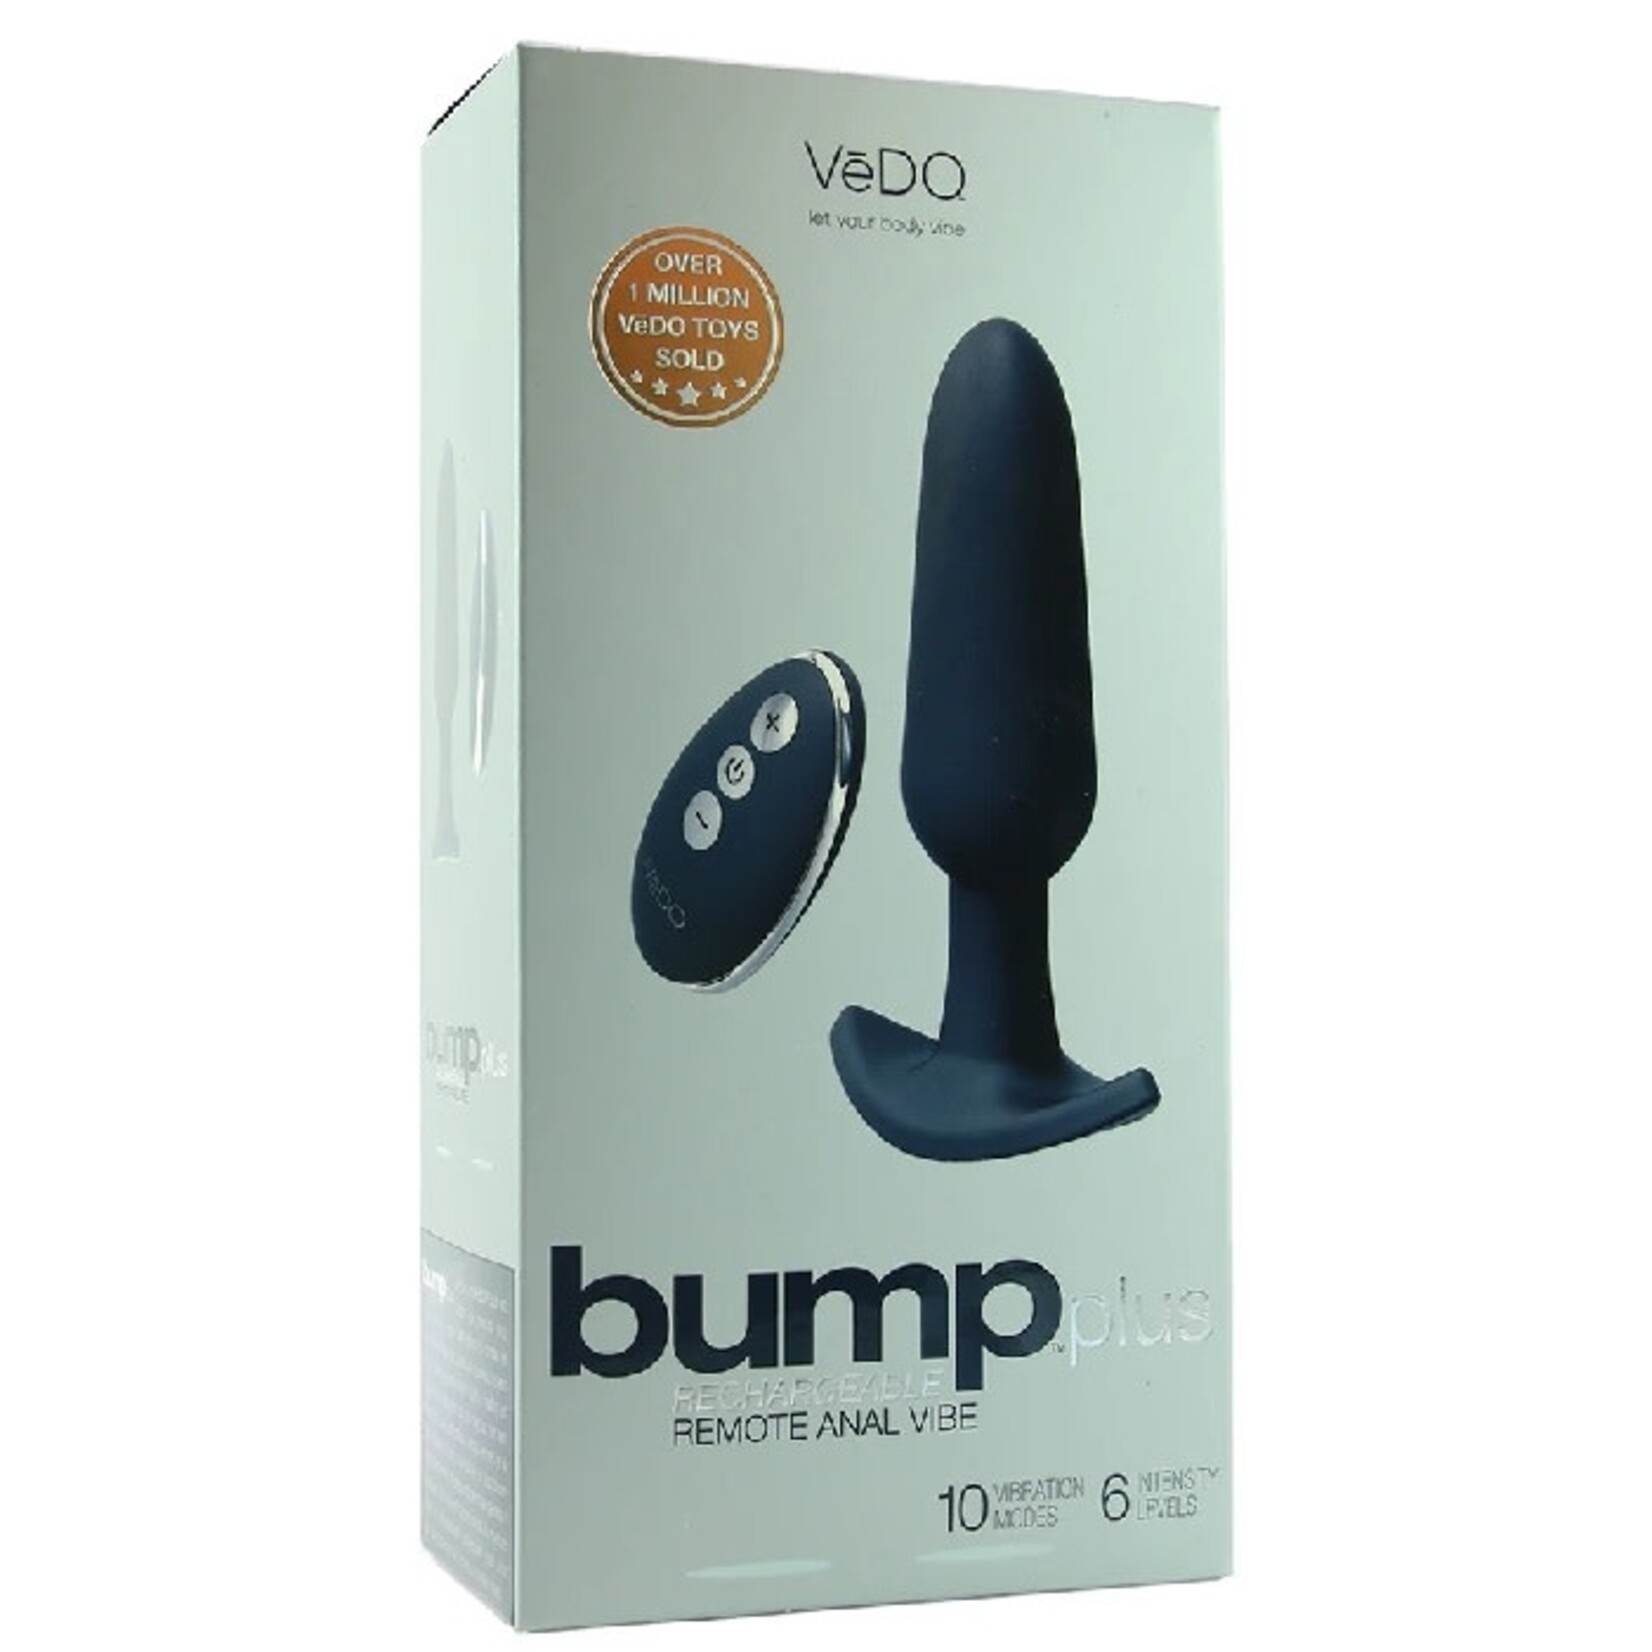 VEDO BUMP PLUS REMOTE ANAL VIBE IN JUST BLACK